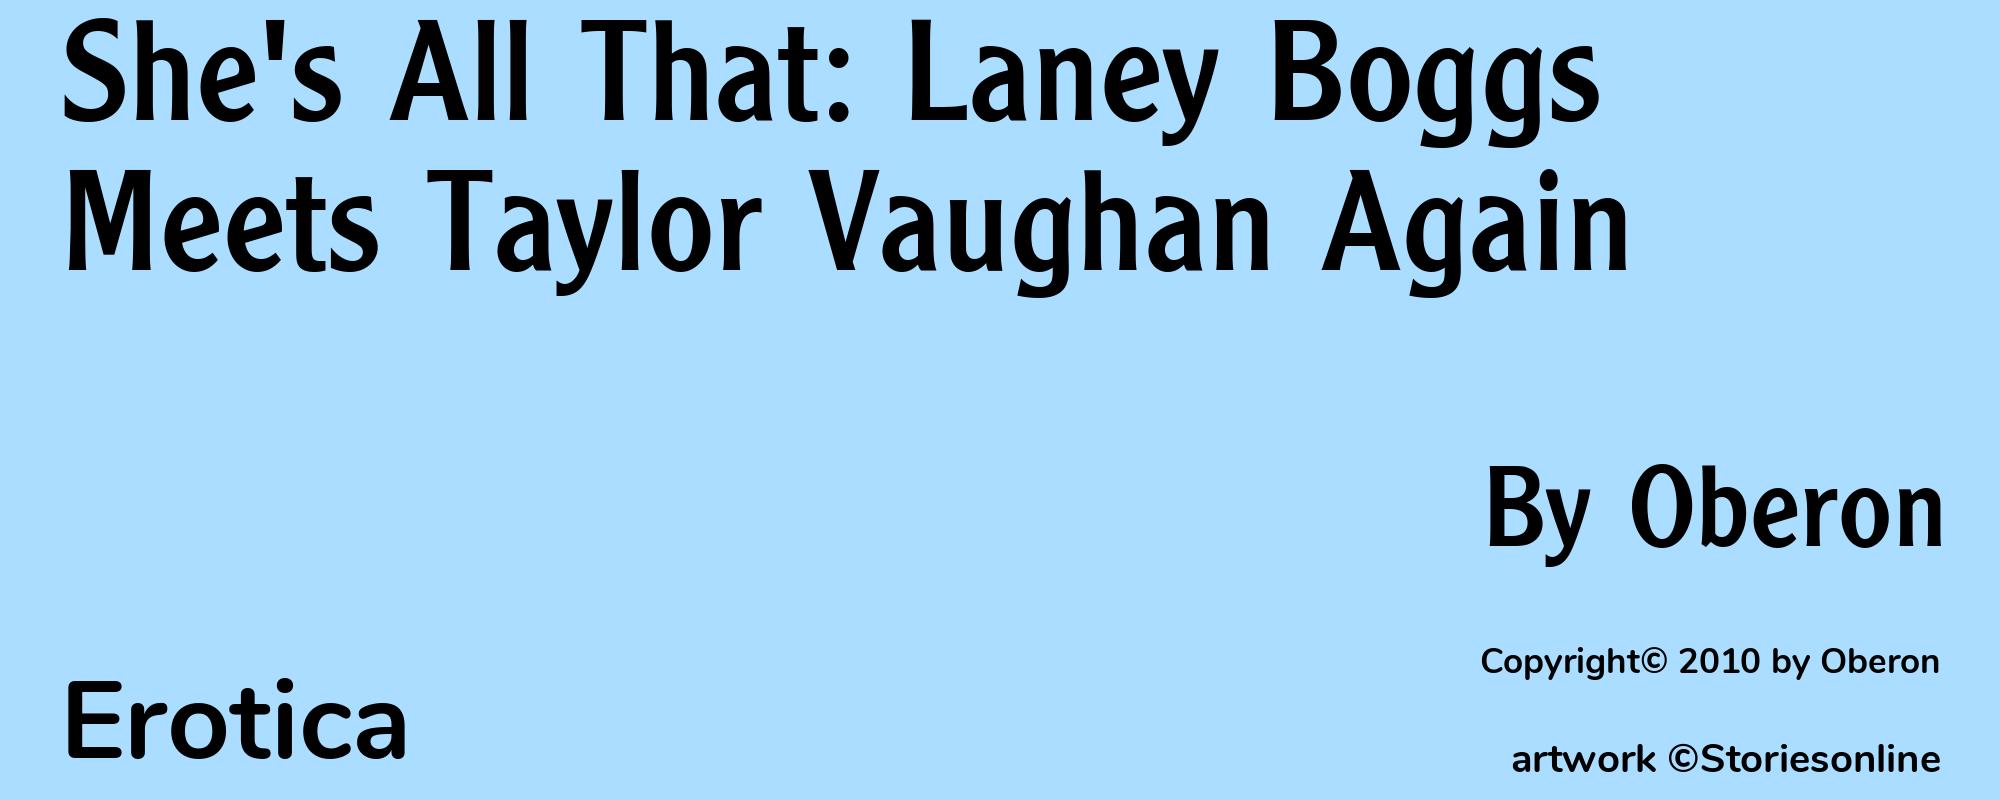 She's All That: Laney Boggs Meets Taylor Vaughan Again - Cover